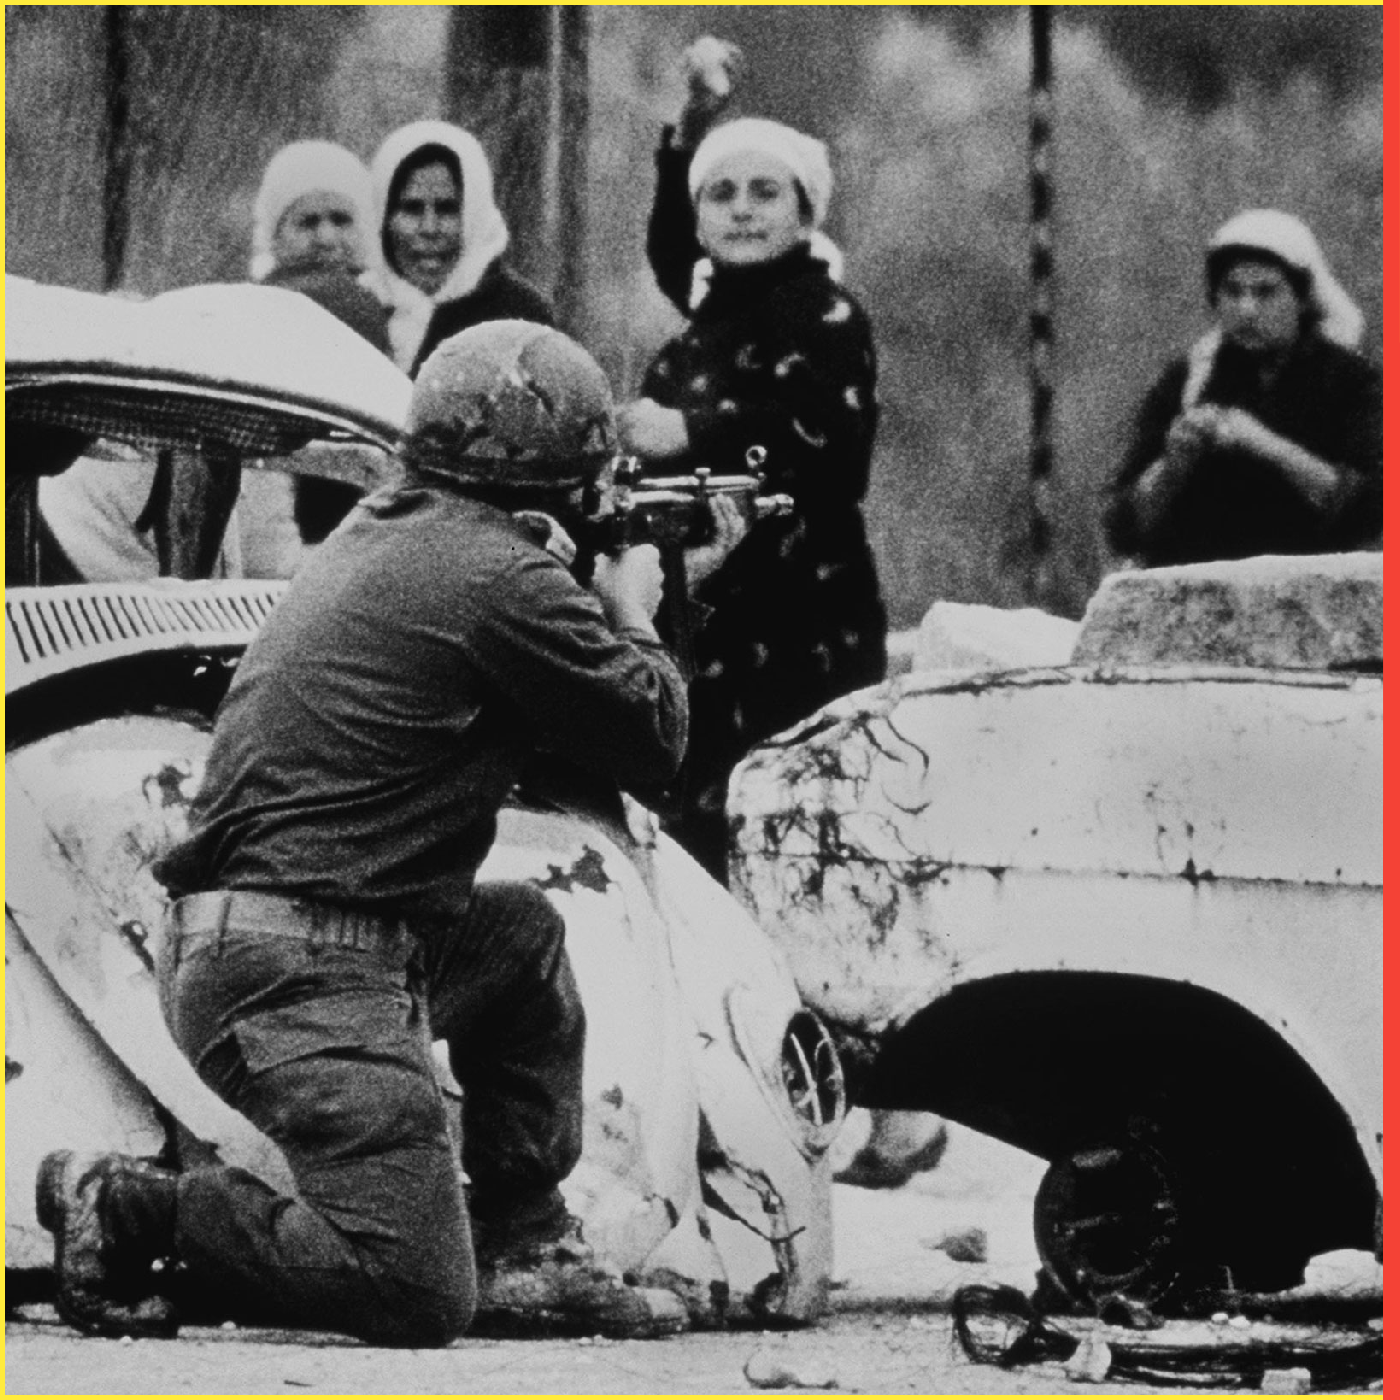 FILE PHOTO FEBRUARY 29, 1988 - An Israeli soldier takes aim as a Palestinian woman hurls a rock at him from close range during a demonstration in which one Palestinian youth was shot dead several months after the outbreak of the "intifada", or Palestinian uprising against Israeli occupation. Palestinians are marking the 10th anniversary of the intifada which began suddenly on December 9, 1987 in the Gaza Strip and spread quickly to the West Bank. The intifada gave birth to the Israeli - Palestinian peace accords, began in 1992 after the historic Madrid peace conference, but many Palestinians ten years later feel let down by the lack of results. MIDEAST INTIFADA